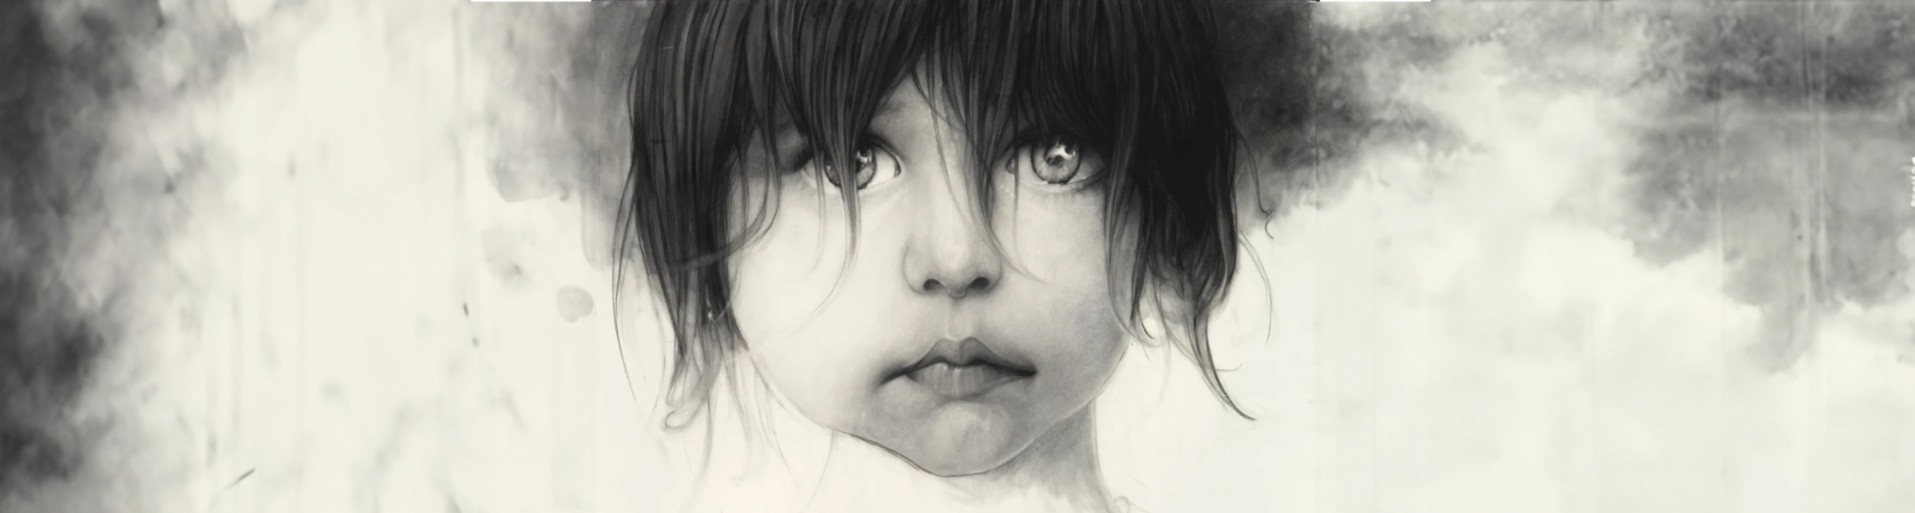 pencil drawing of a girl's face